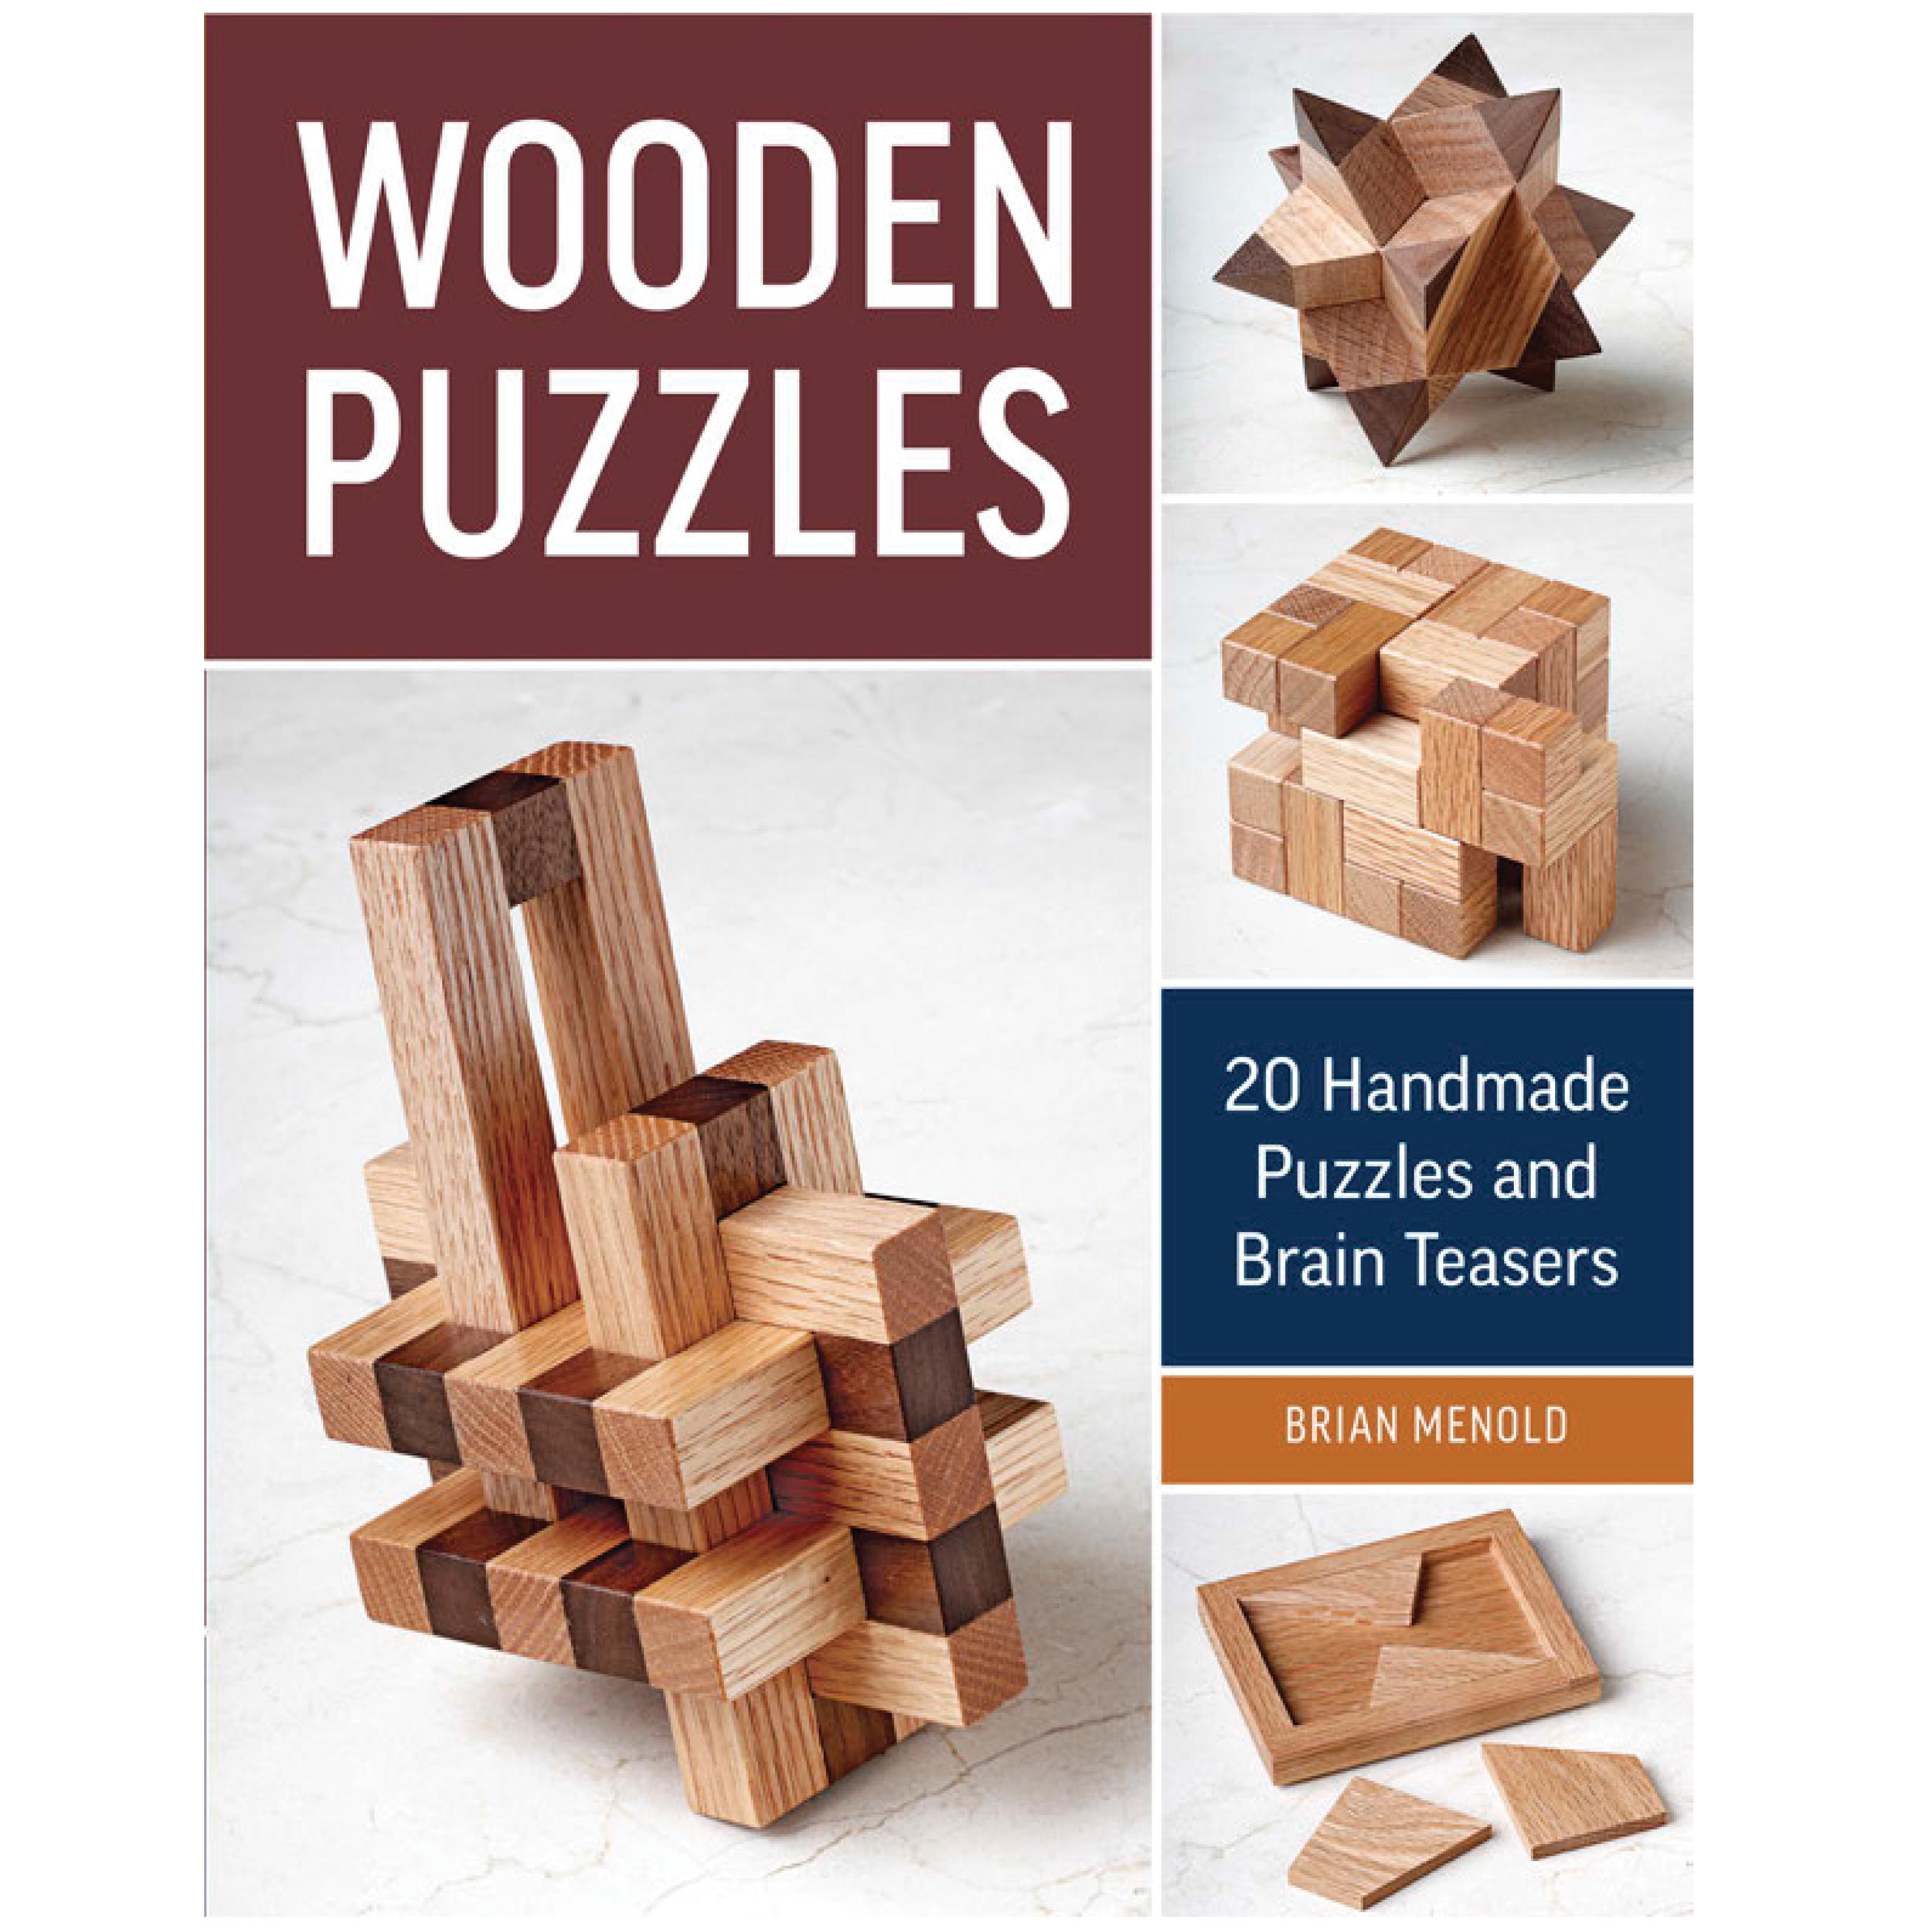 Wooden Puzzles: 20 Handmade Puzzles And Brain Teasers